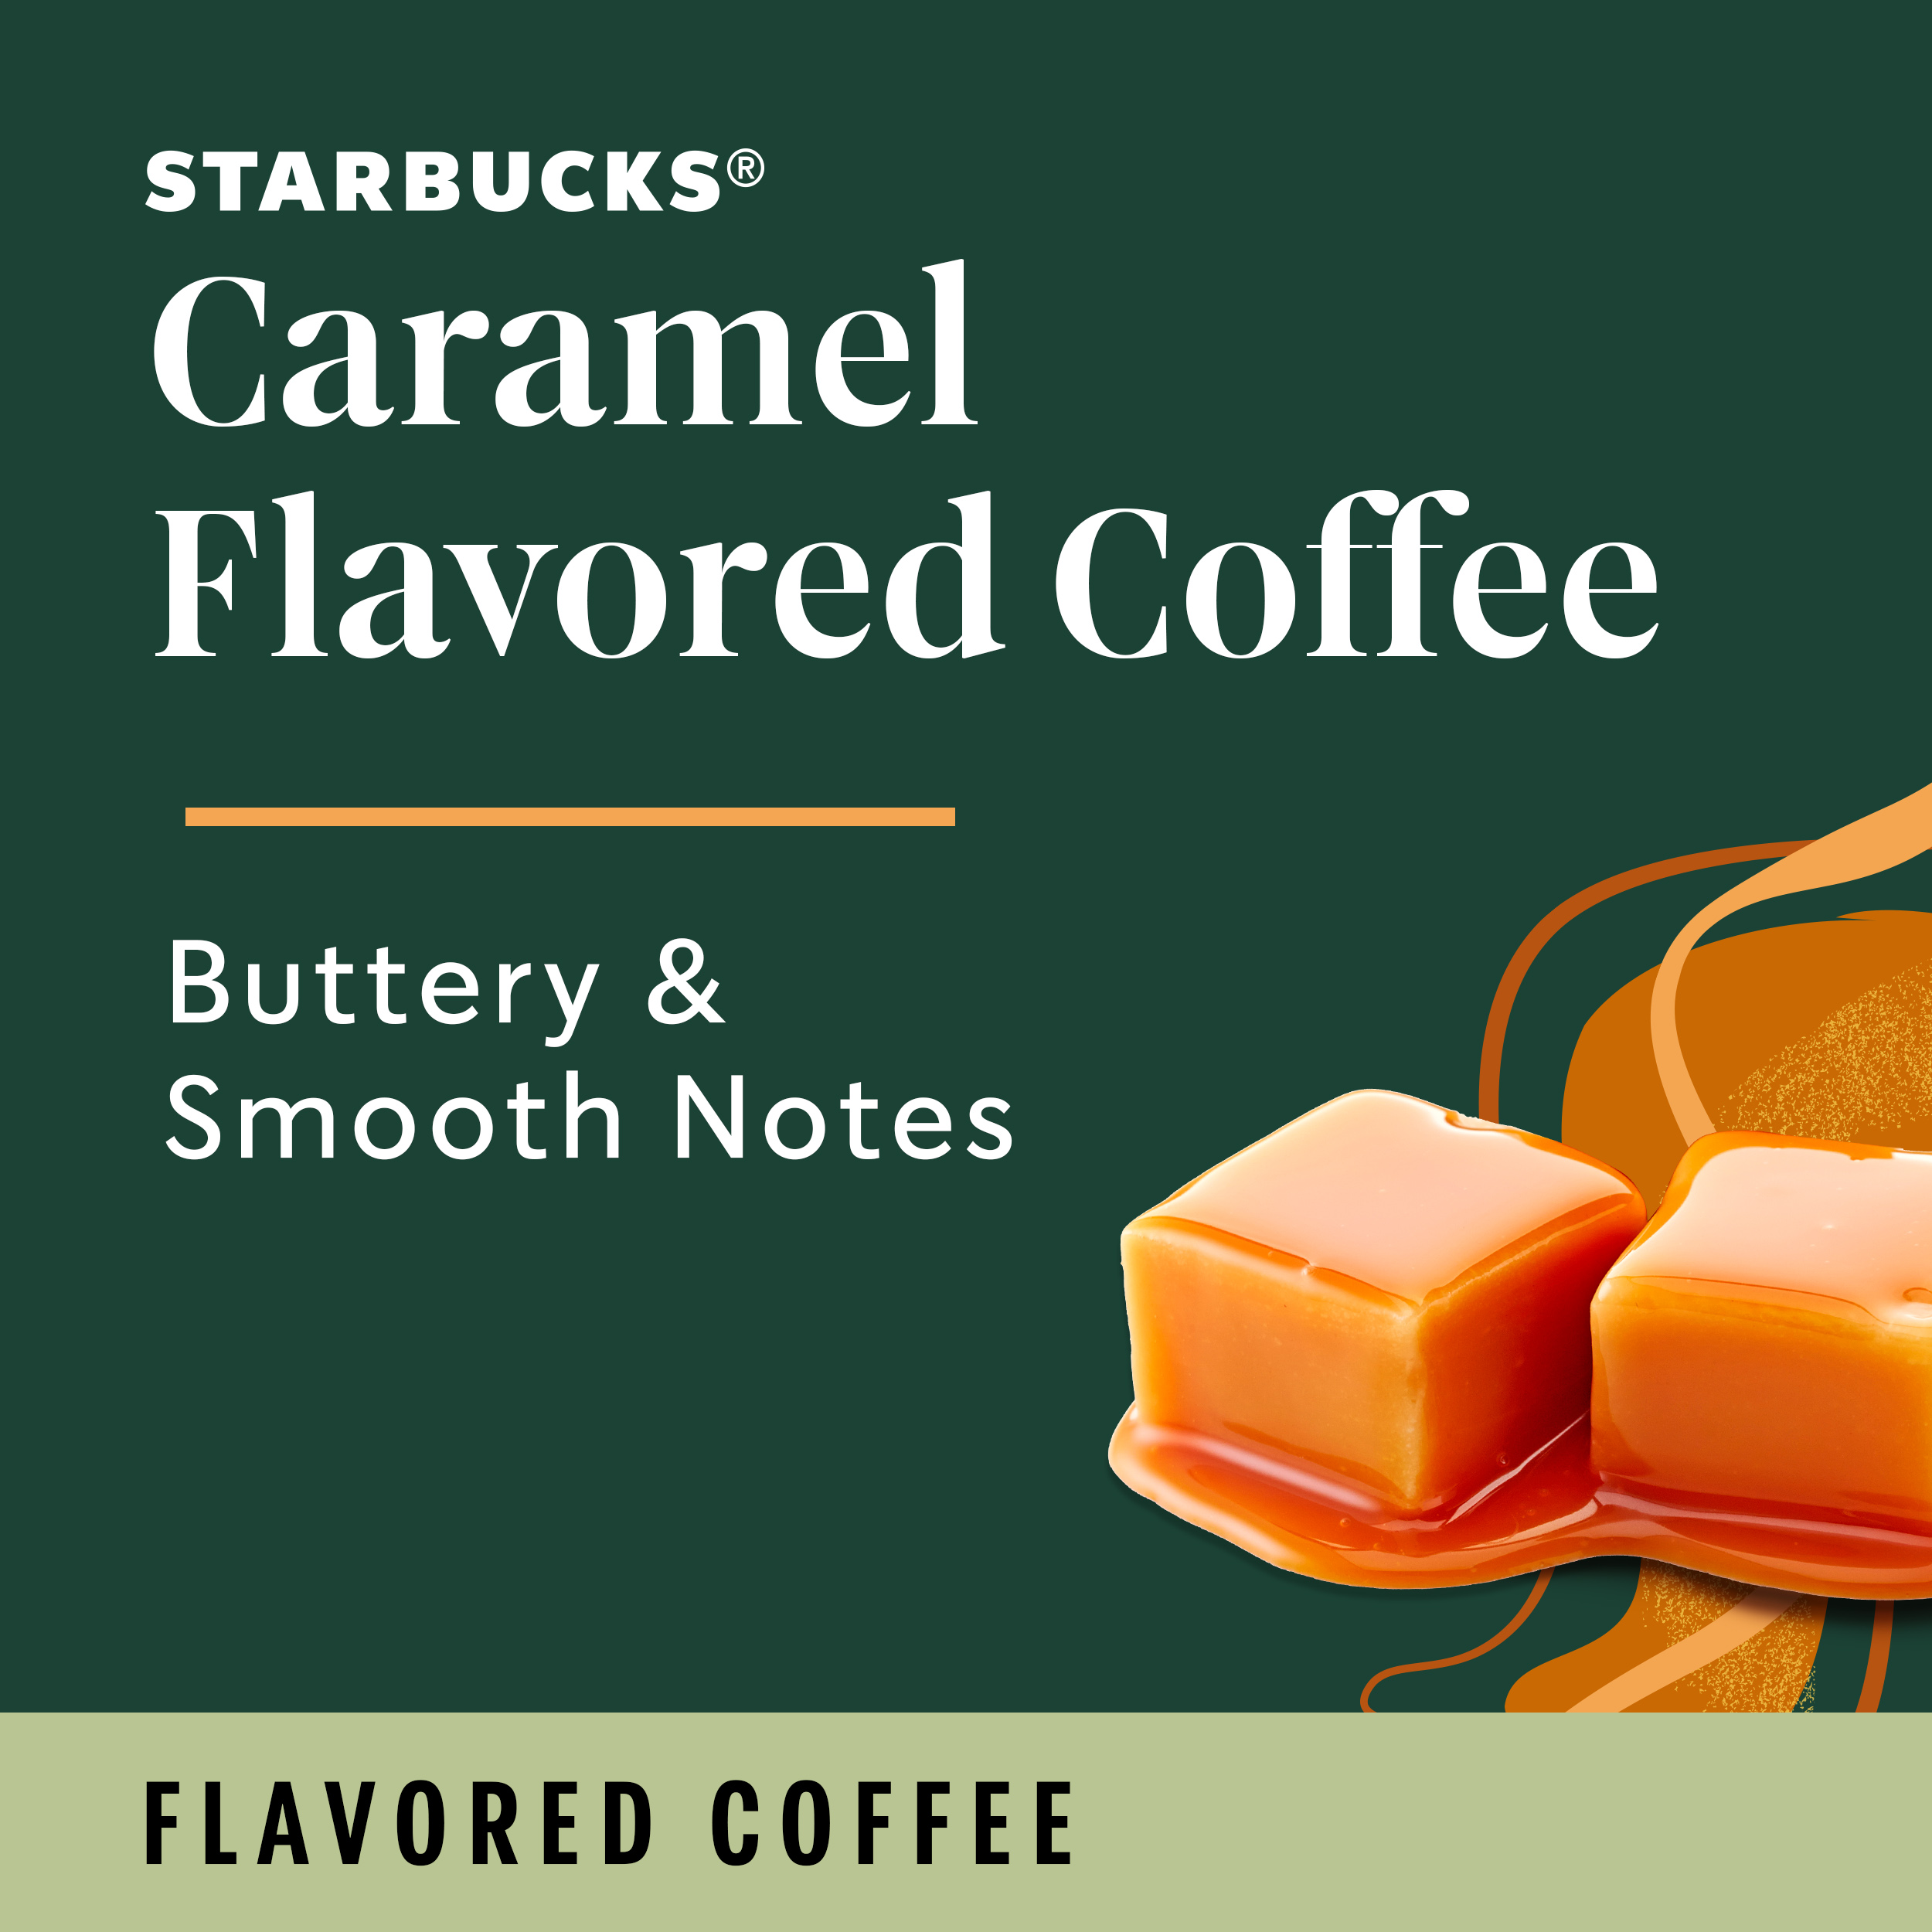 Starbucks Arabica Beans Caramel, Naturally Flavored, Ground Coffee, 11oz - image 3 of 8